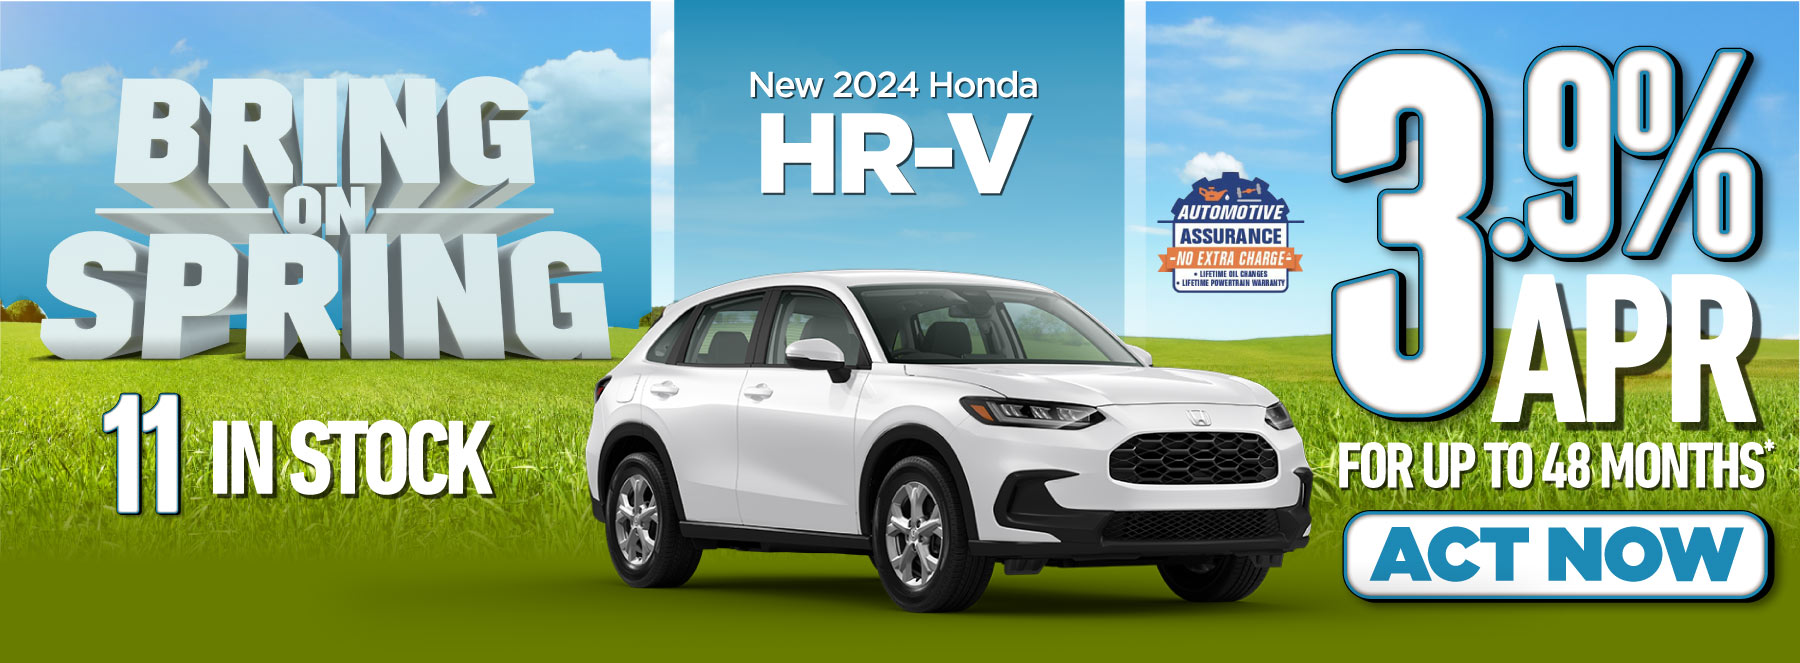 New 2024 Honda HR-V - Get 3.9% APR for up to 48 months* | Act Now